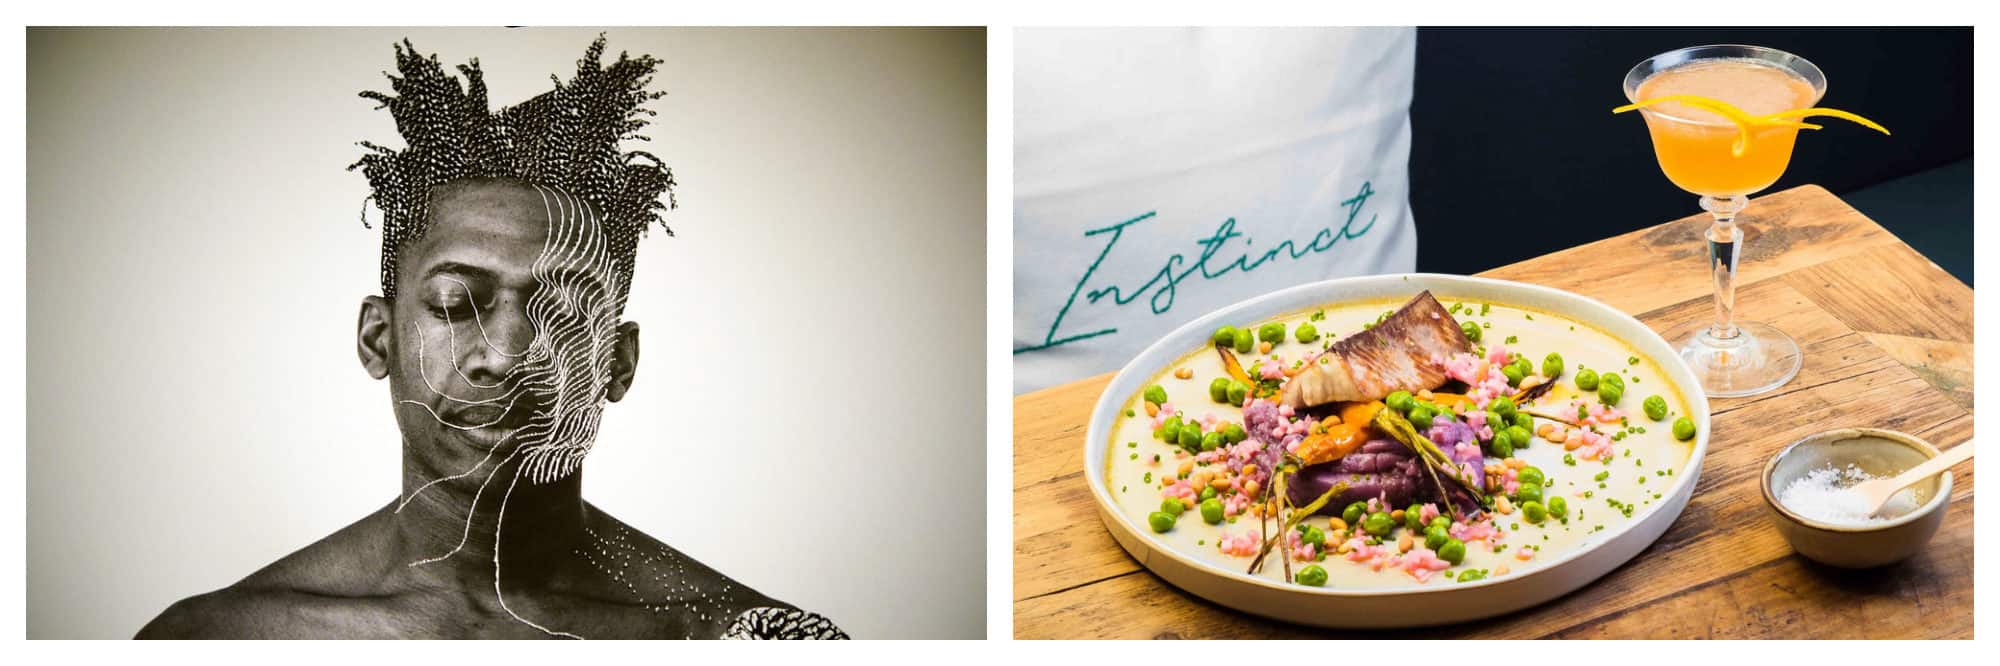 A black and white photo of a black man with his a spider's web drawn in top from Paris Photo event (left). A plate of food at the Paris Cocktail Festival (right).